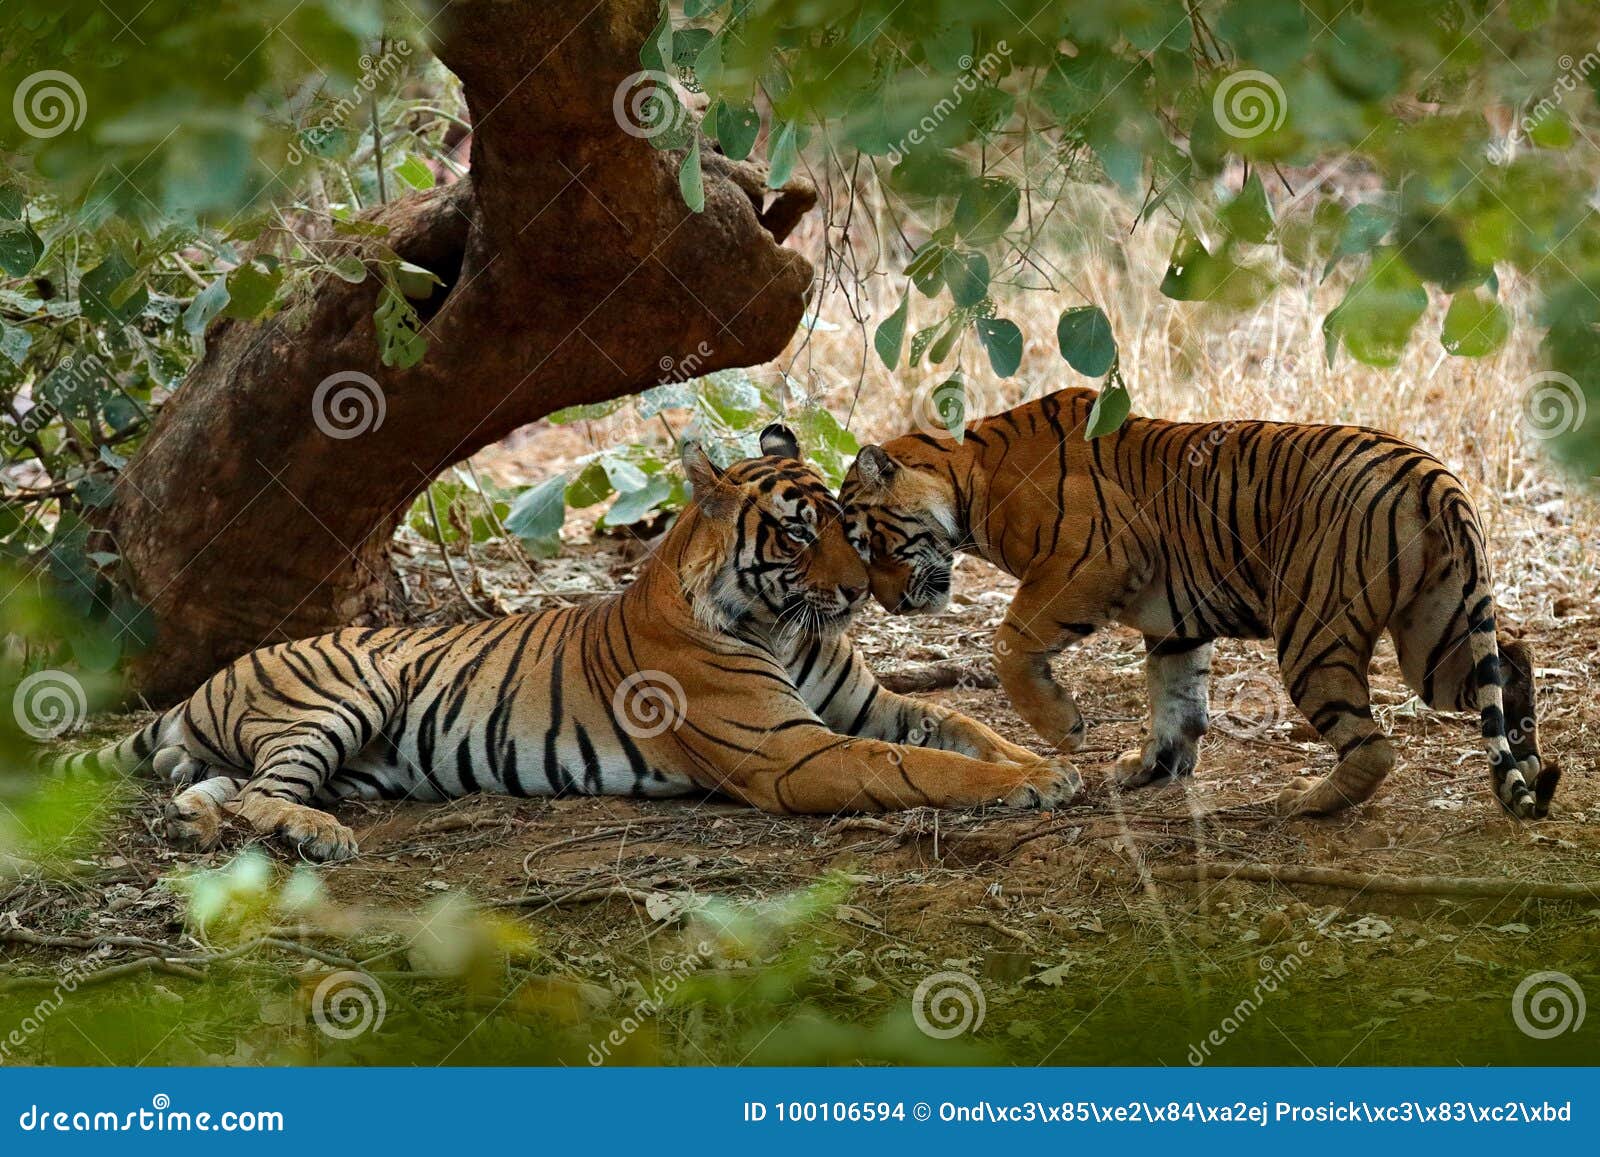 couple of indian tiger, male in left, female in right, first rain, wild animal, nature habitat, ranthambore, india. big cat, endan